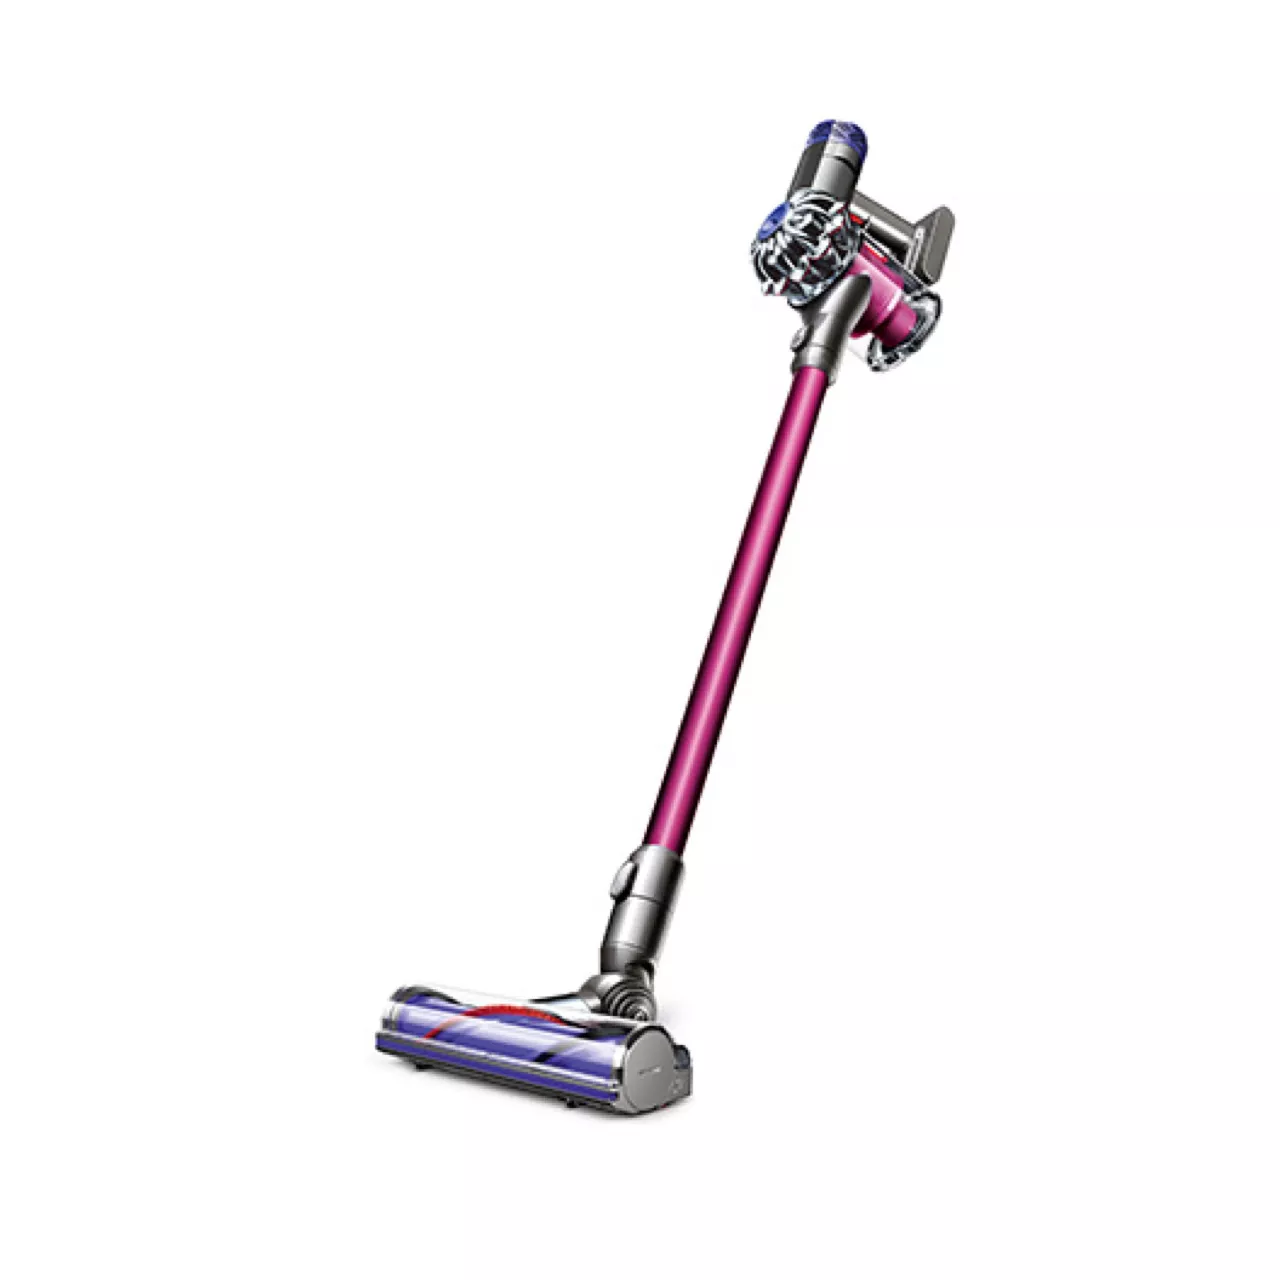 Dyson SV03 UK in Stockport Enquire Today | Village Supplies